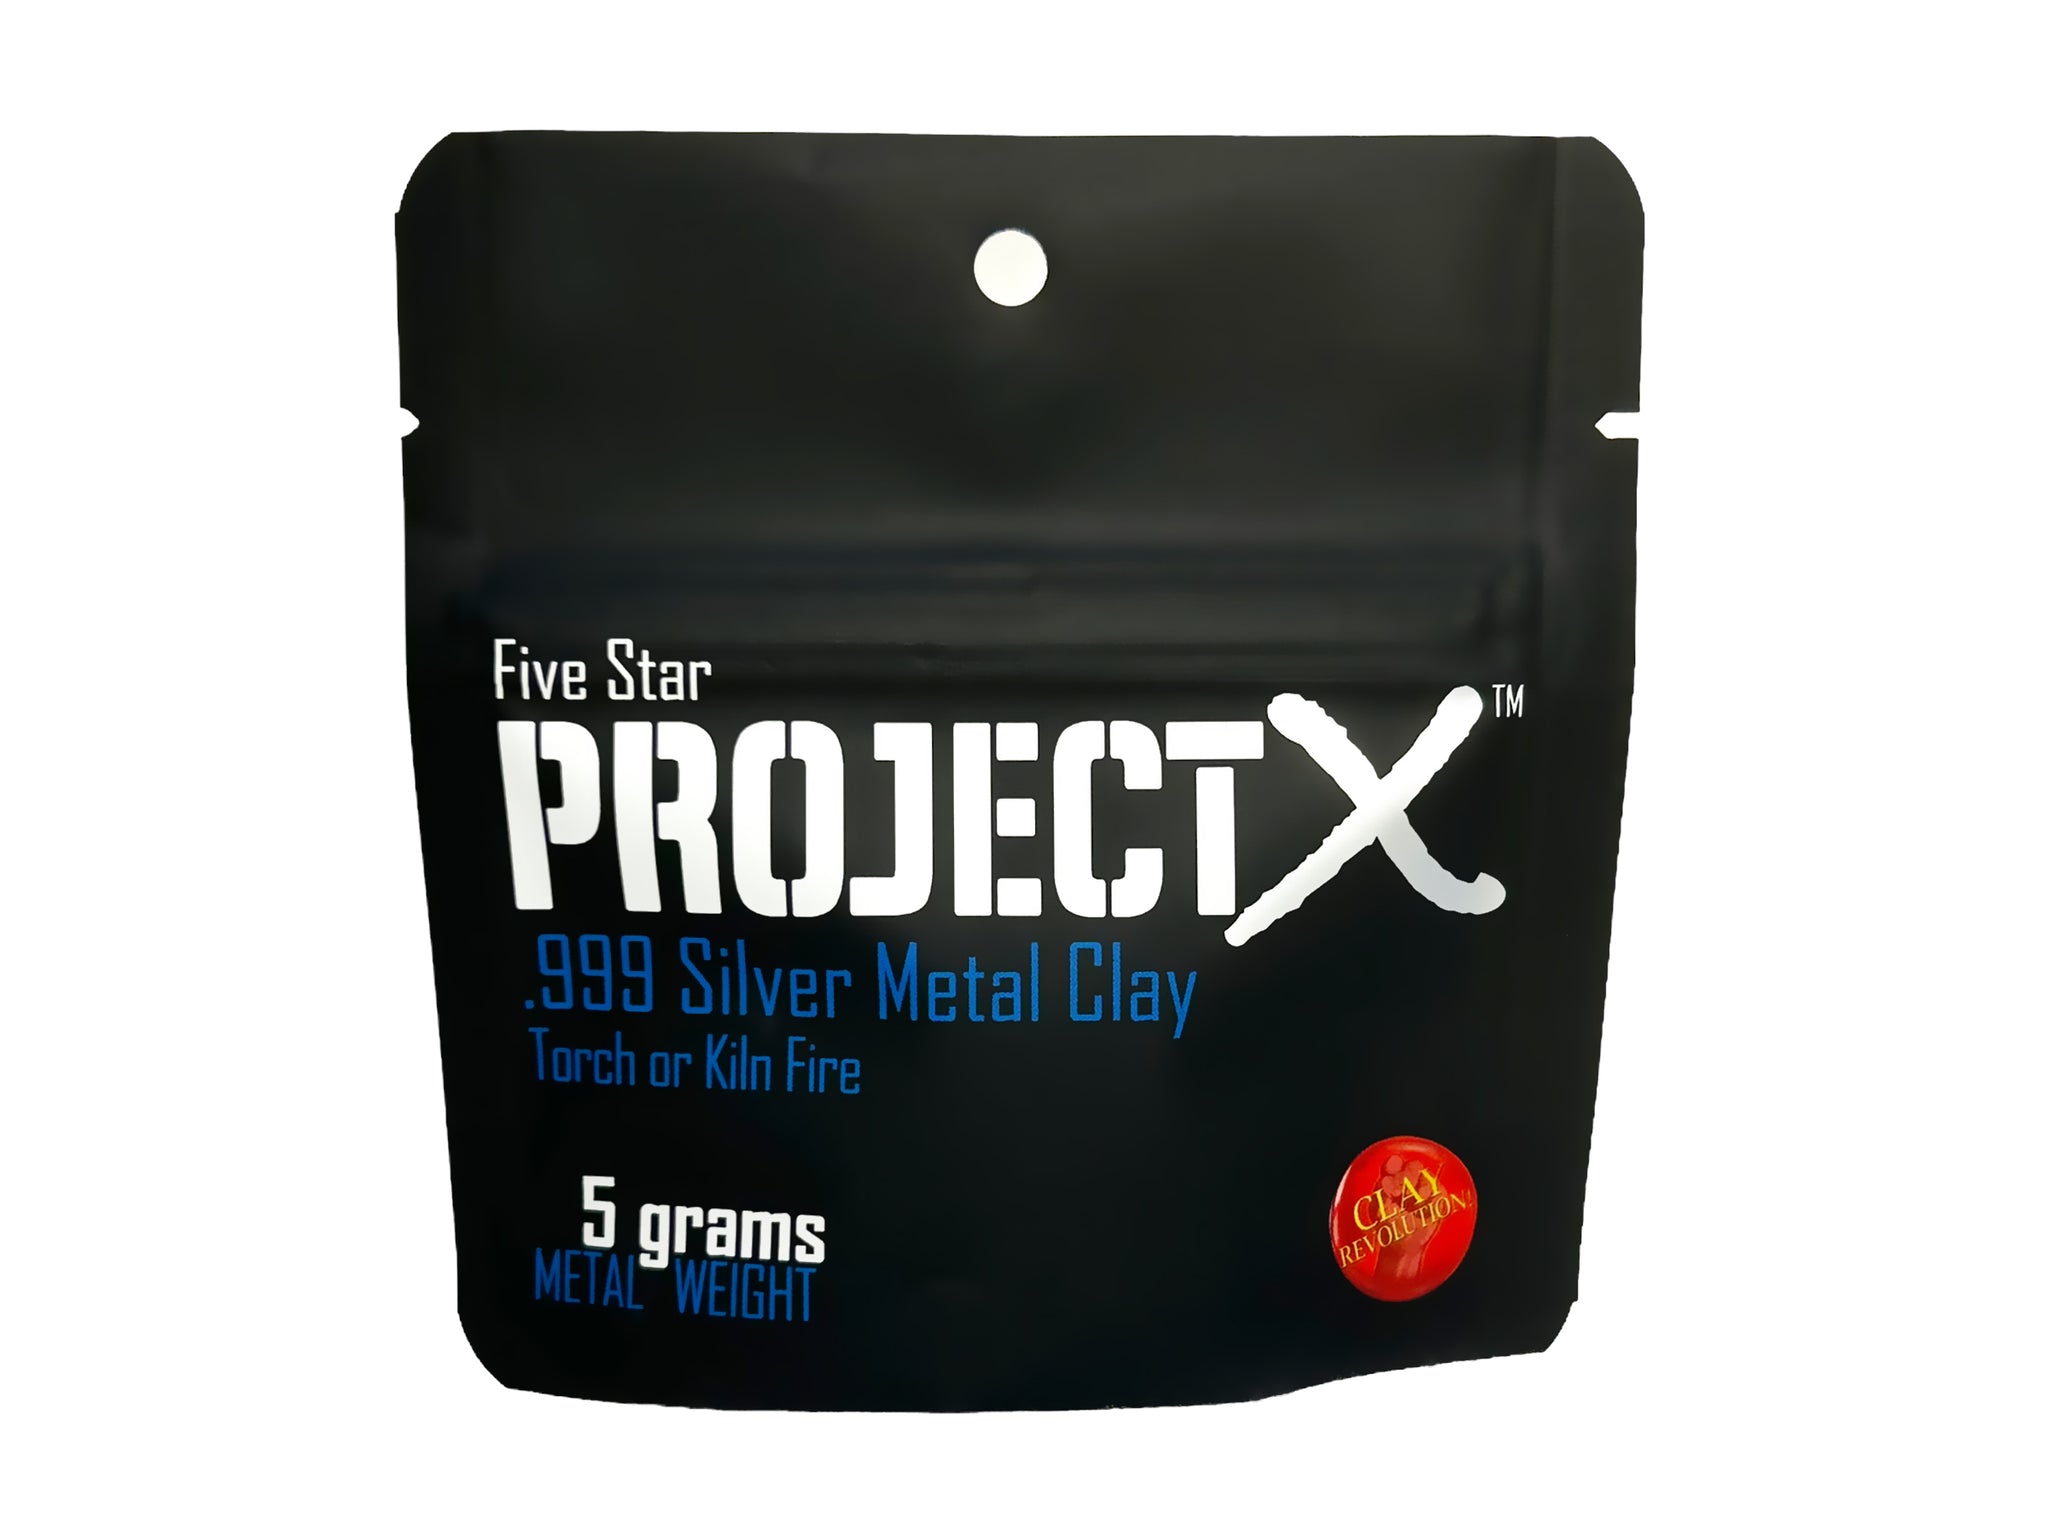 Want to get into Precious Metal Clay?! Check out our Precious Metal C